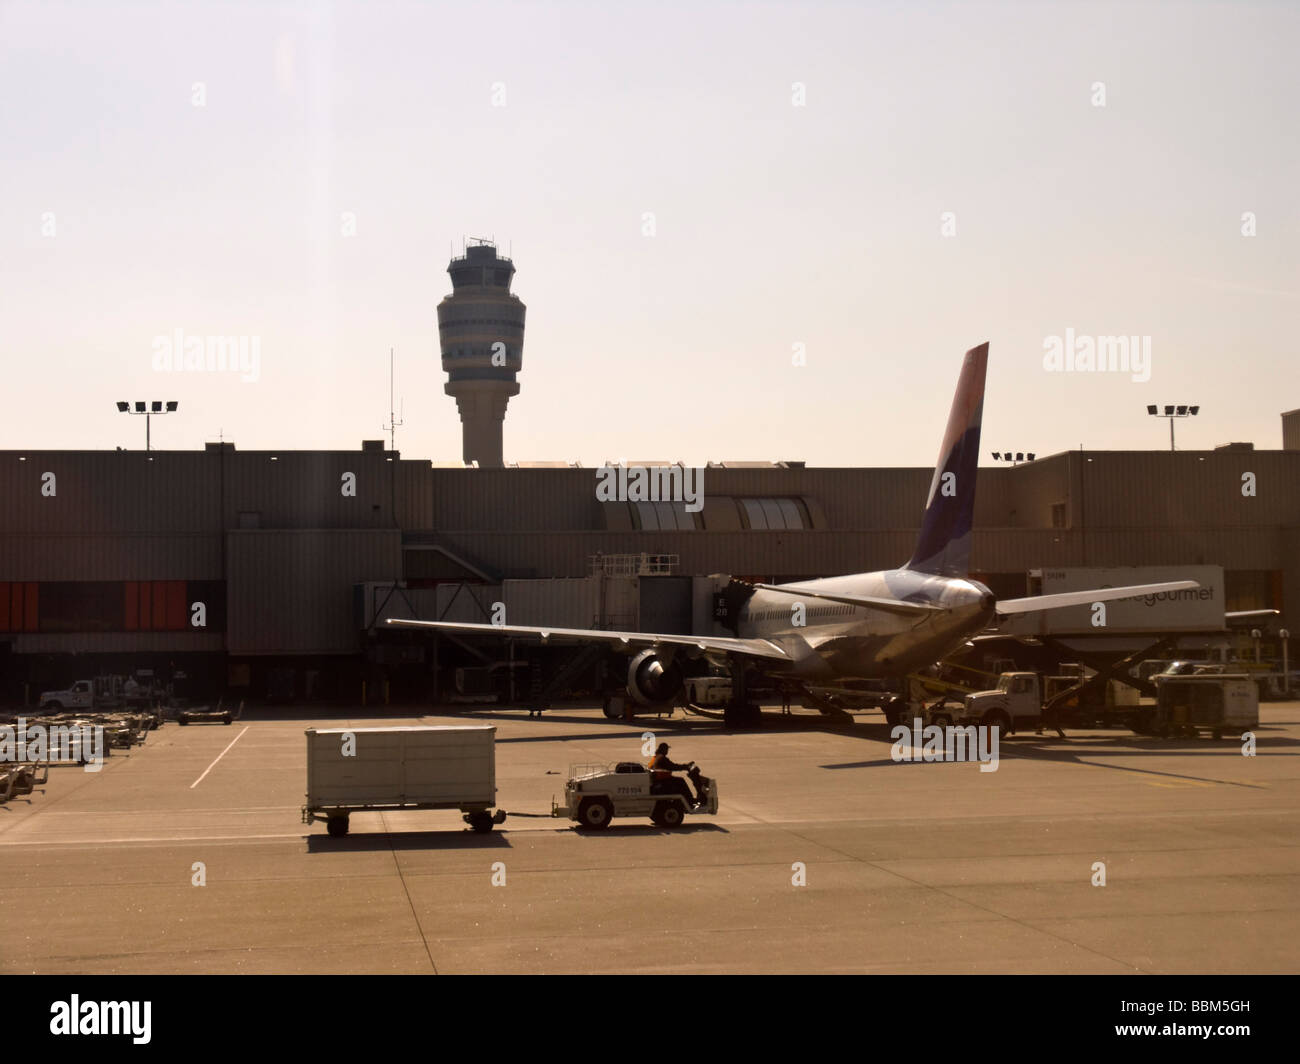 Comercial Aviation, airlines on grond at airport. Stock Photo